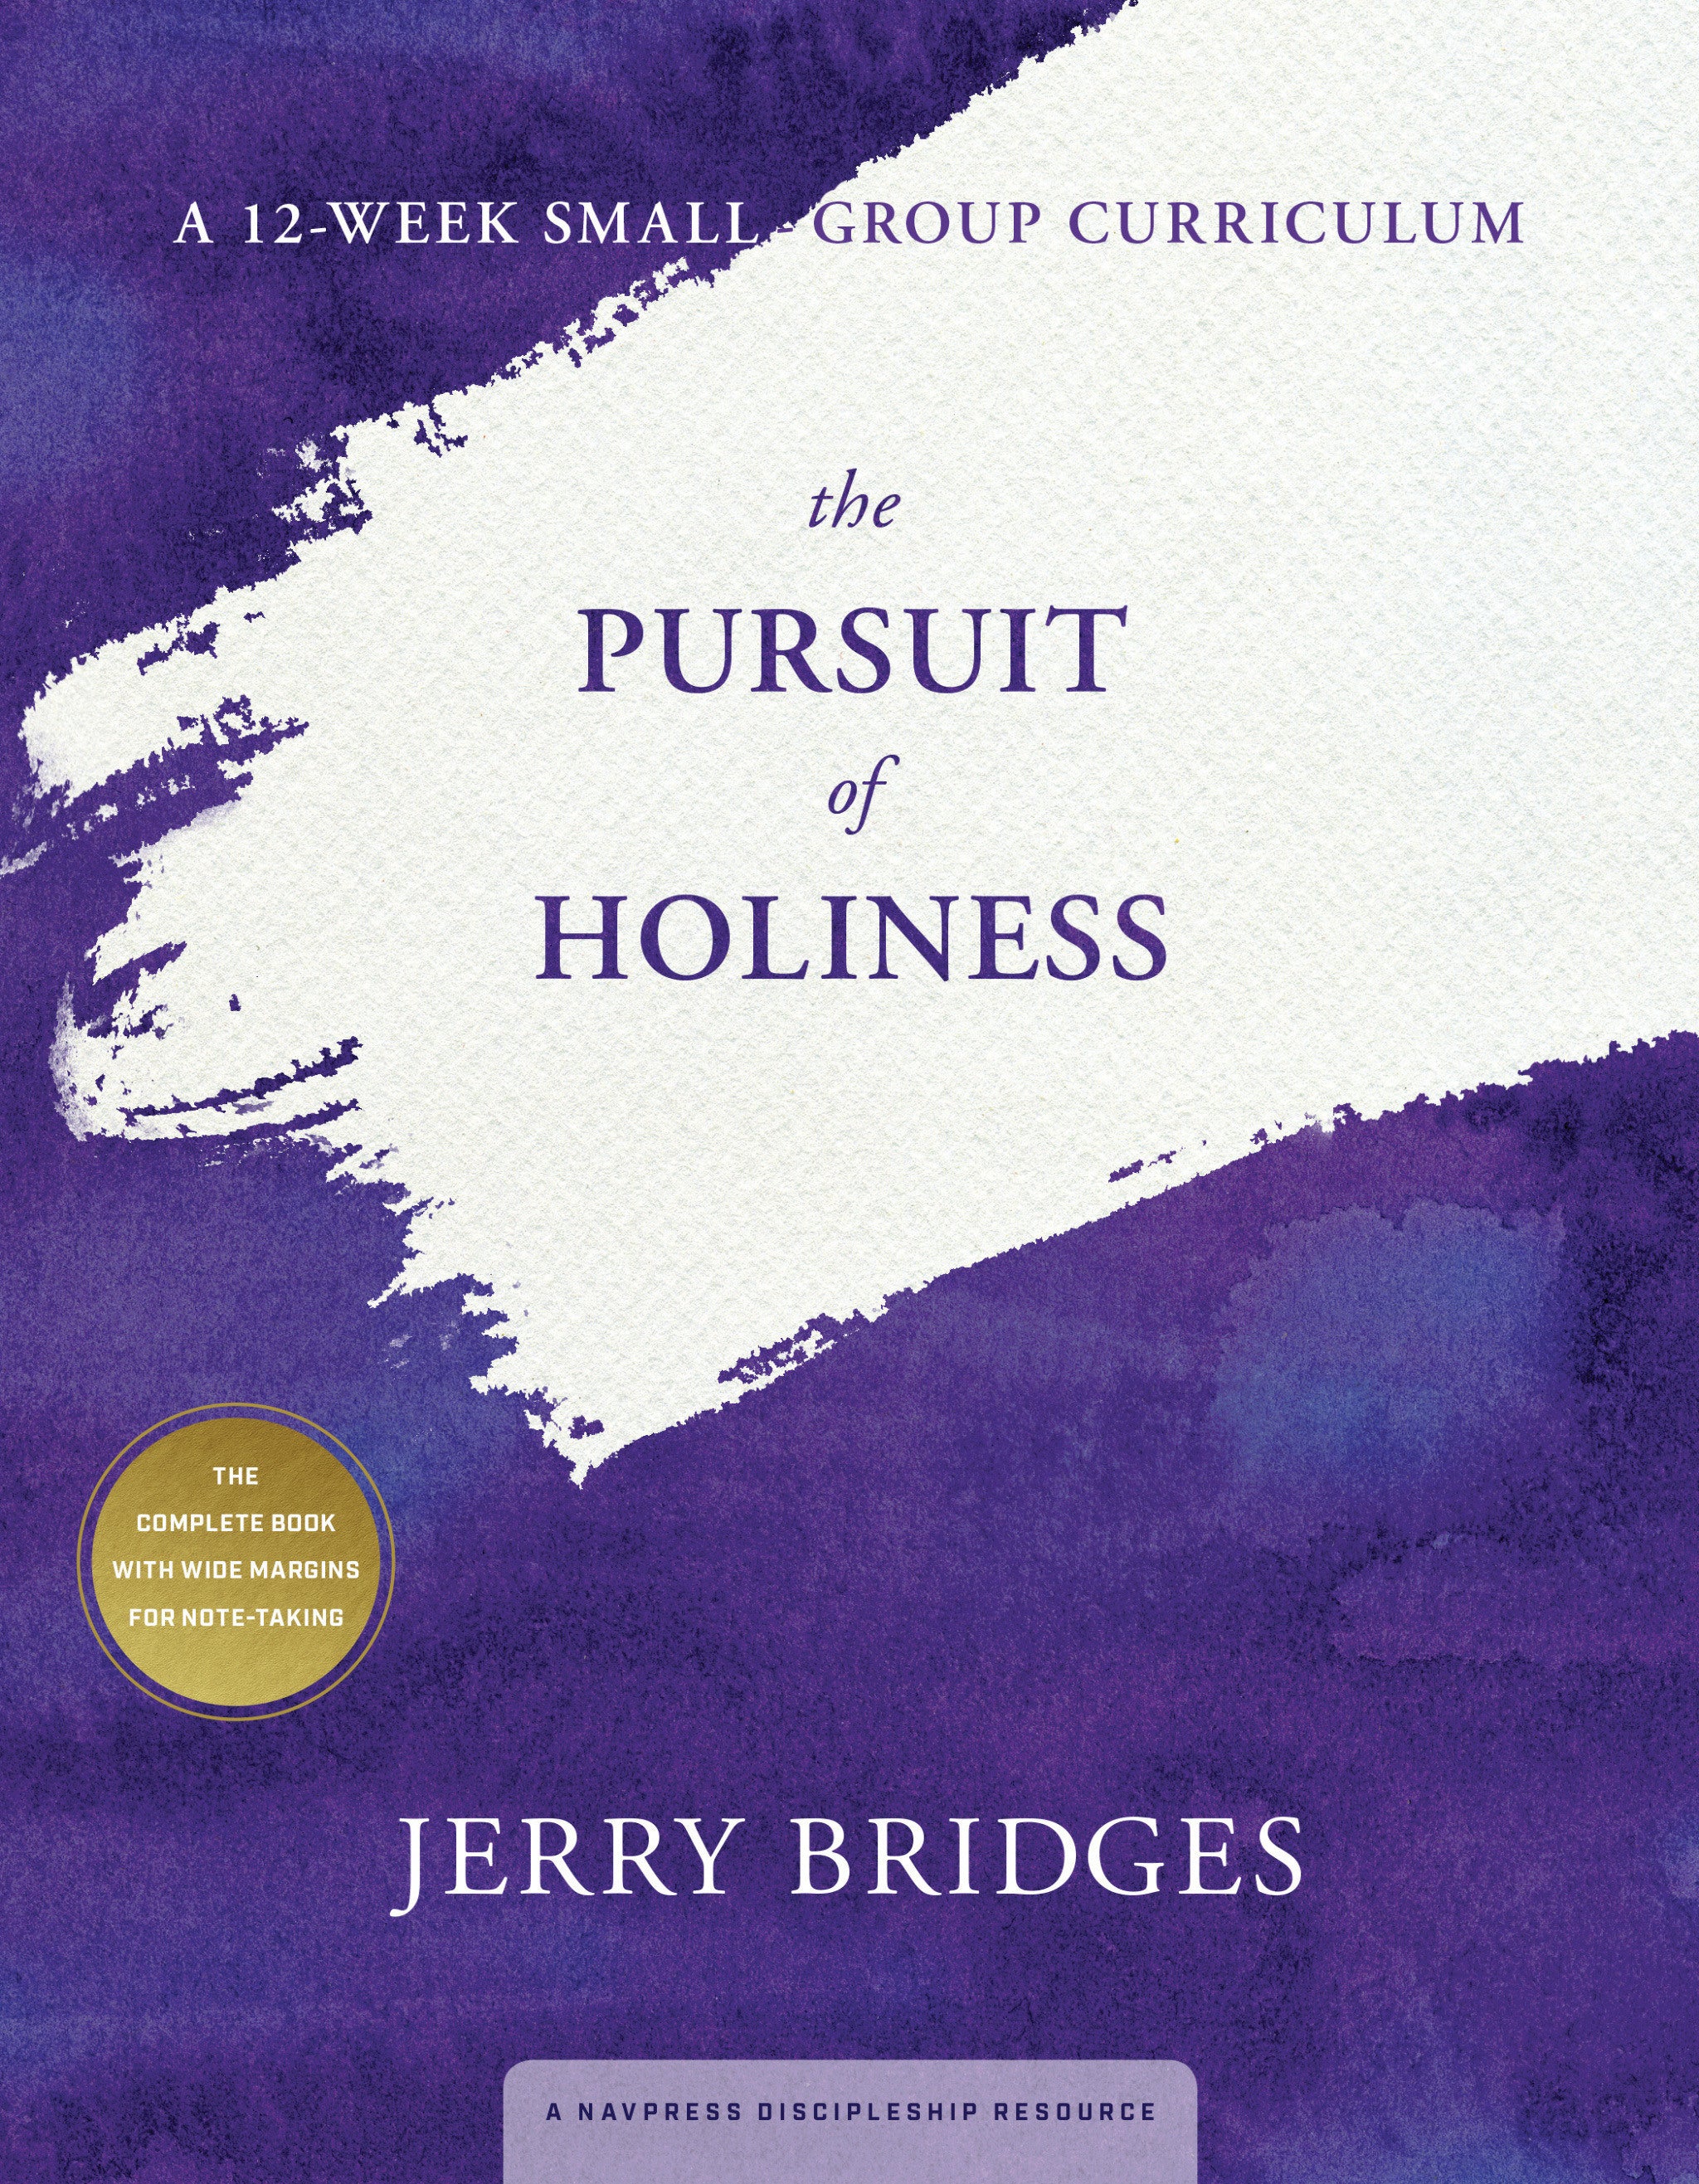 Image of The Pursuit of Holiness, A 12-Week Small-Group Curriculum other